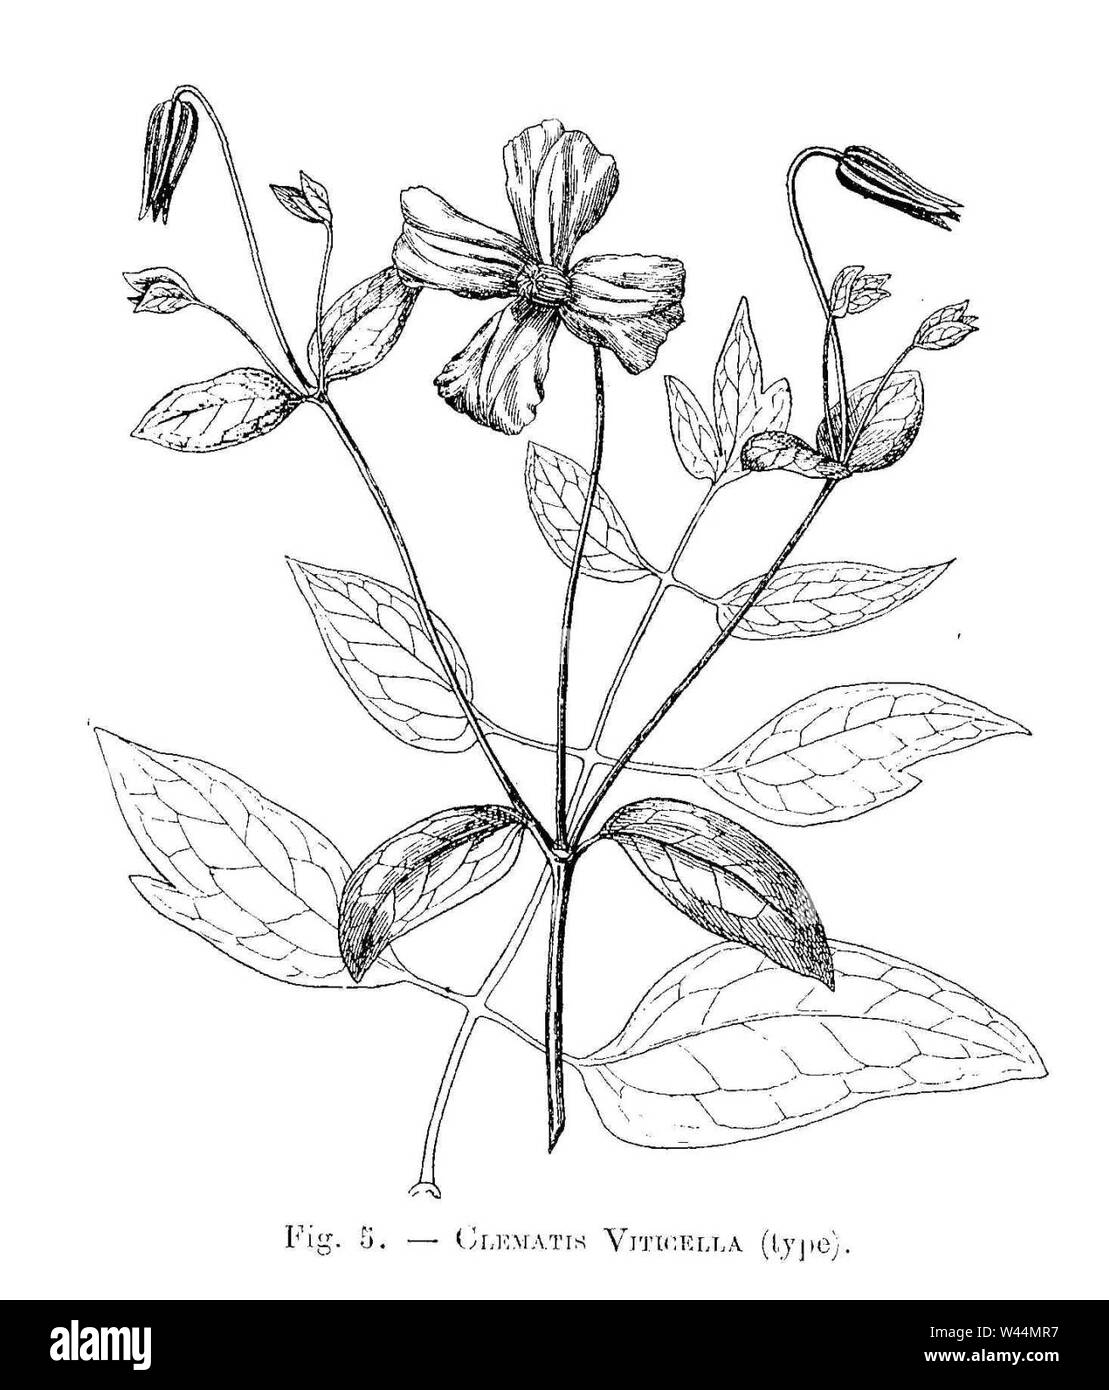 Clematis viticella (type dessiné). Stock Photo